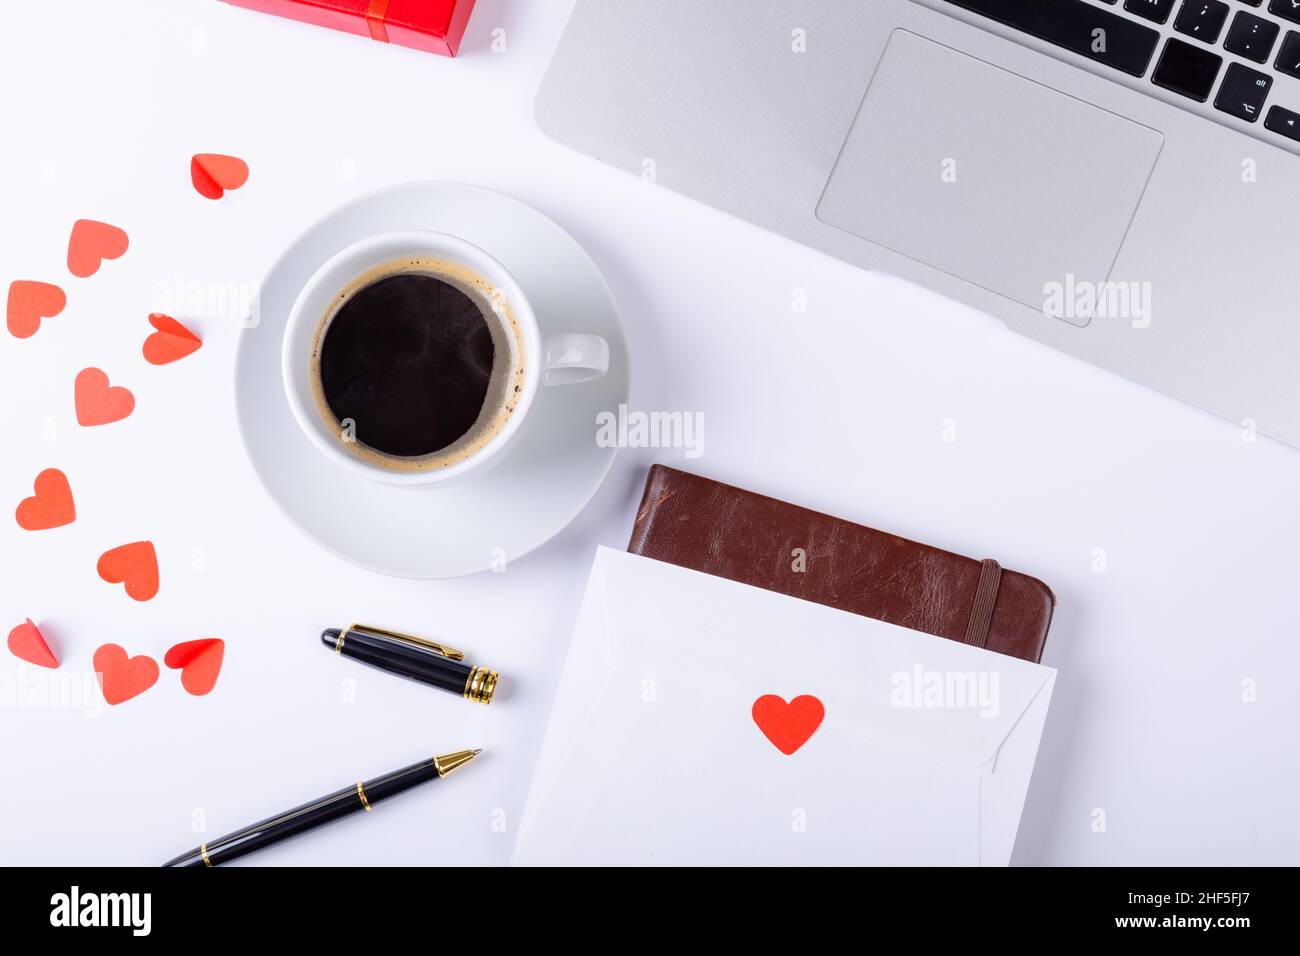 Overhead view of black coffee with love letter, fountain pen, laptop on white background, copy space Stock Photo